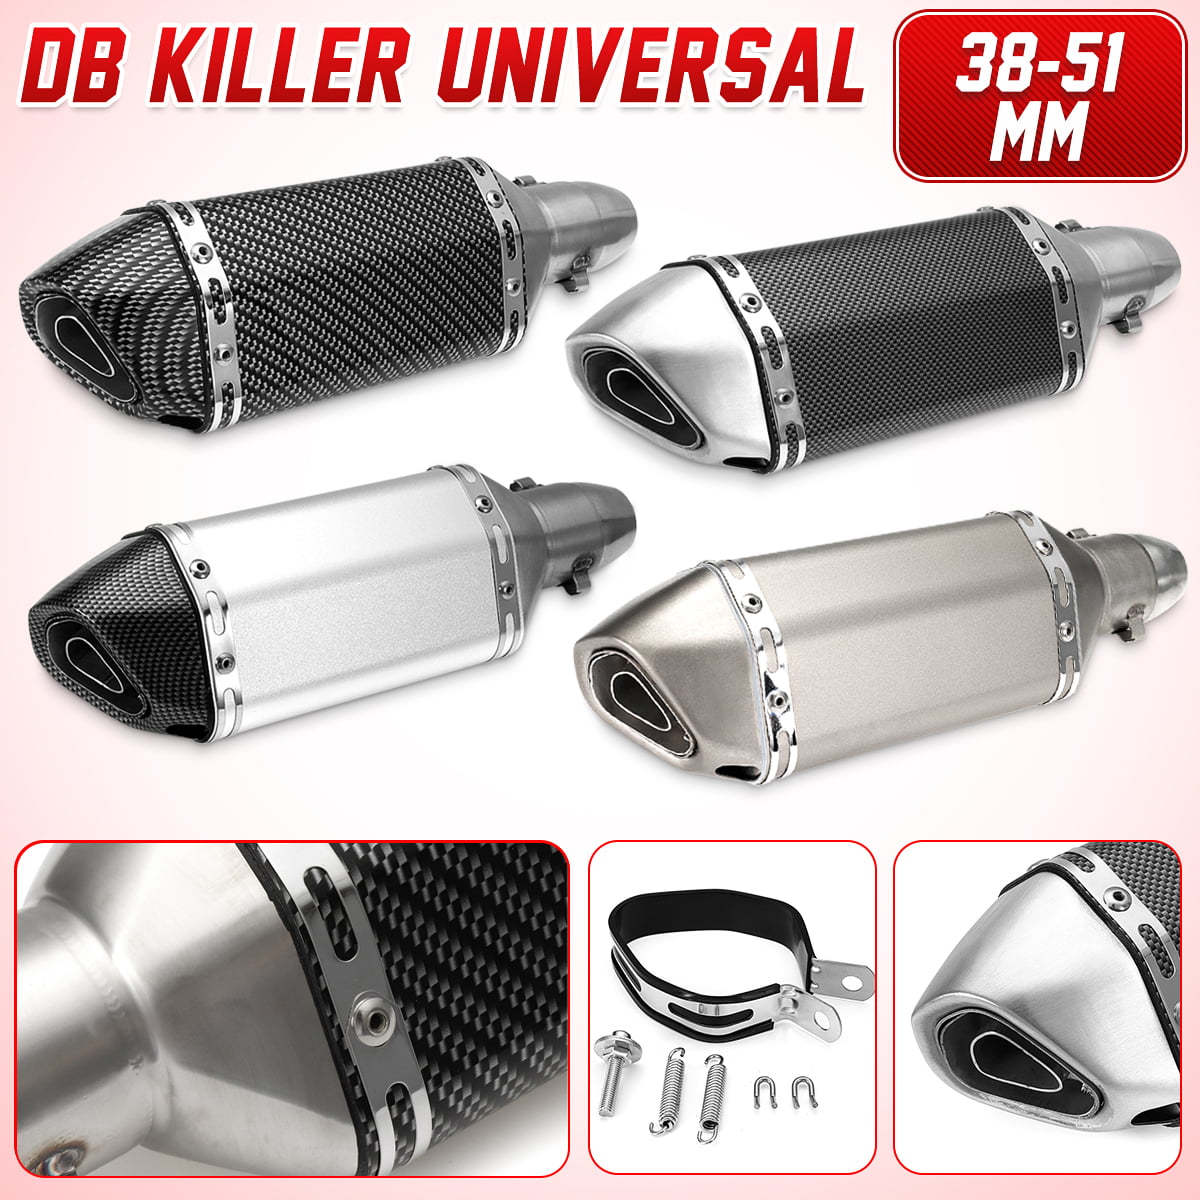 Motorcycle Exhaust 51mm Universal Motorbike Silencer Accessories Muffler Rear Tailpipe DB Killer Modified Noise Eliminator for Scooter ATV Pit Bike Black 1